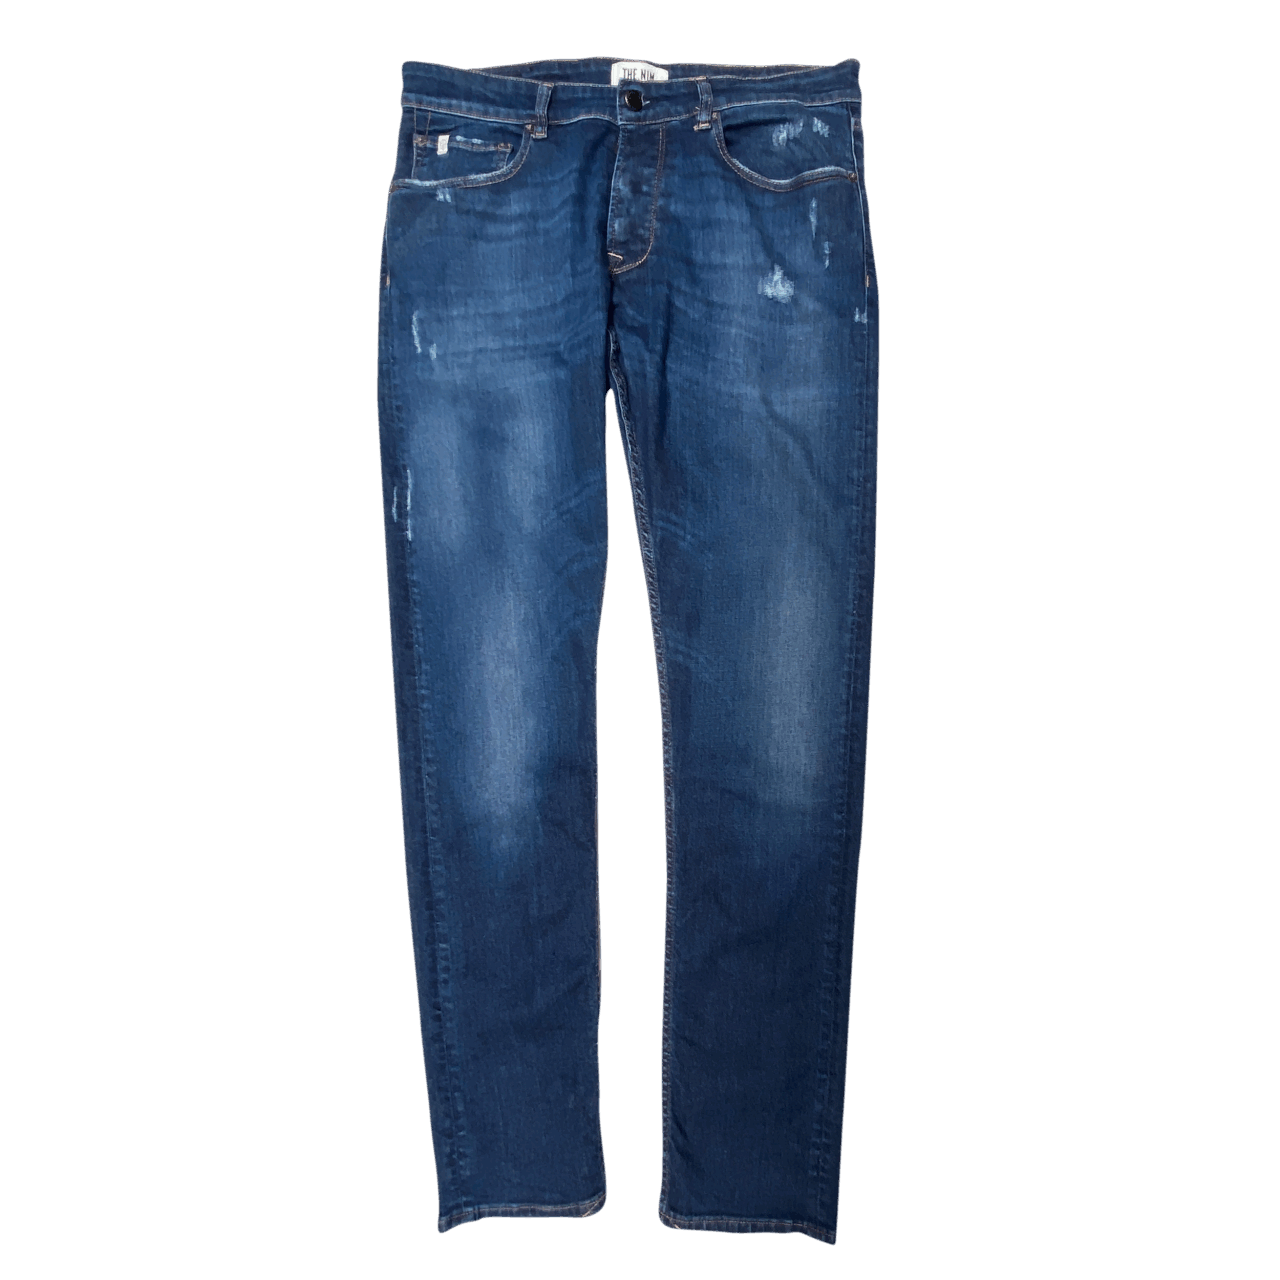 THE.NIM 952 Morrison Jeans Slim Tapered Fit - distressed blue